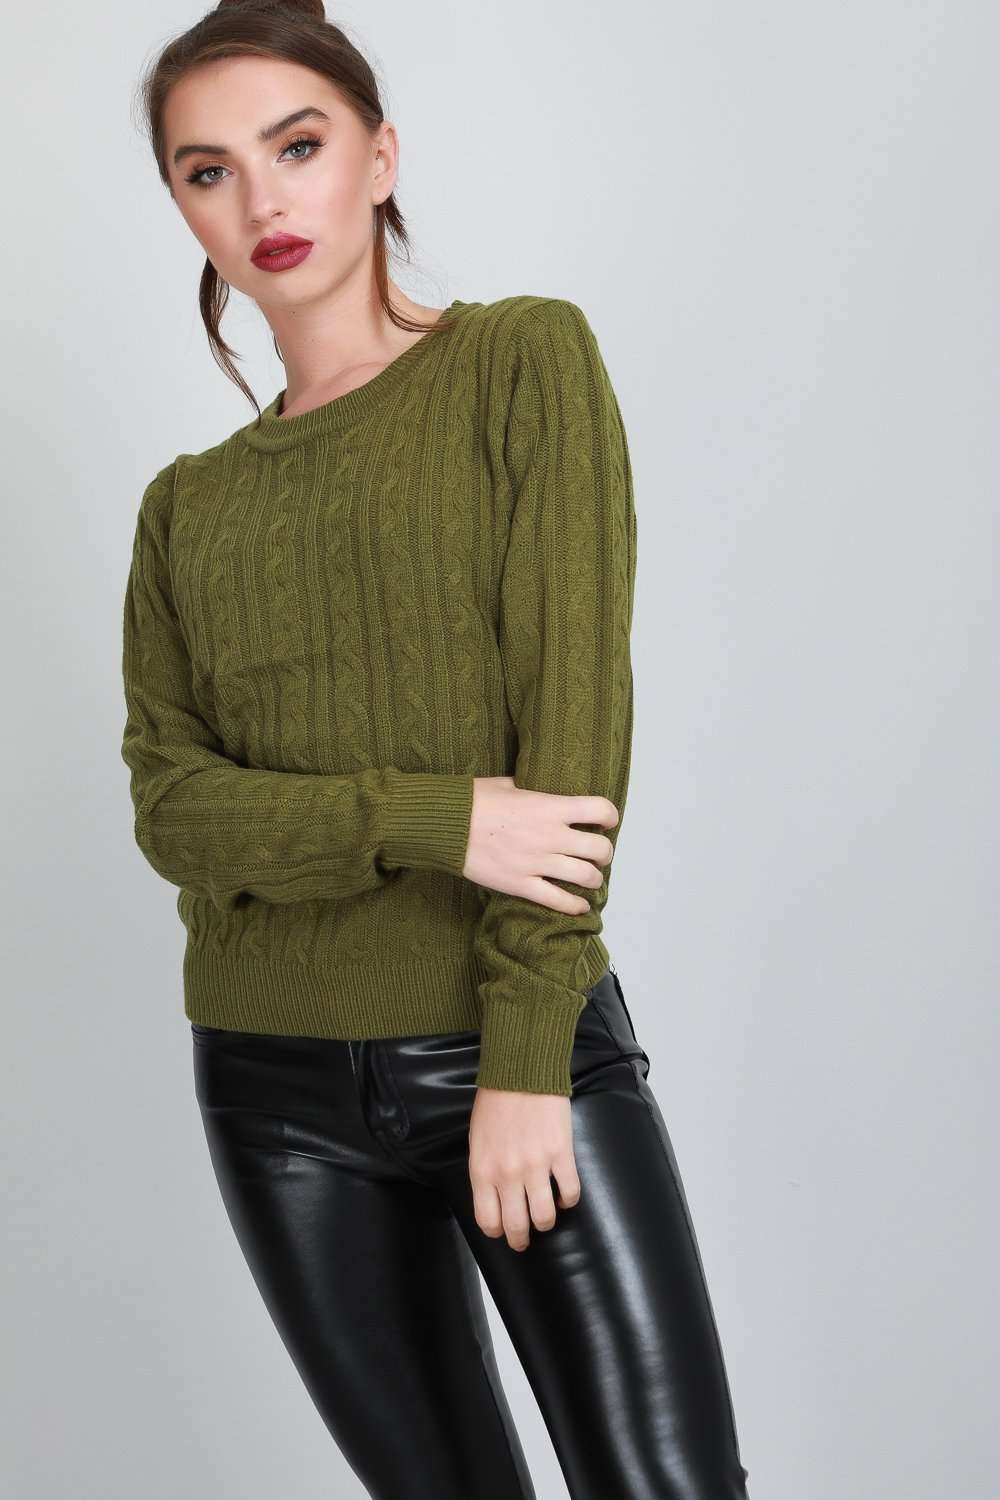 Jai Long Sleeve Cable Knitted Baggy Jumper - bejealous-com